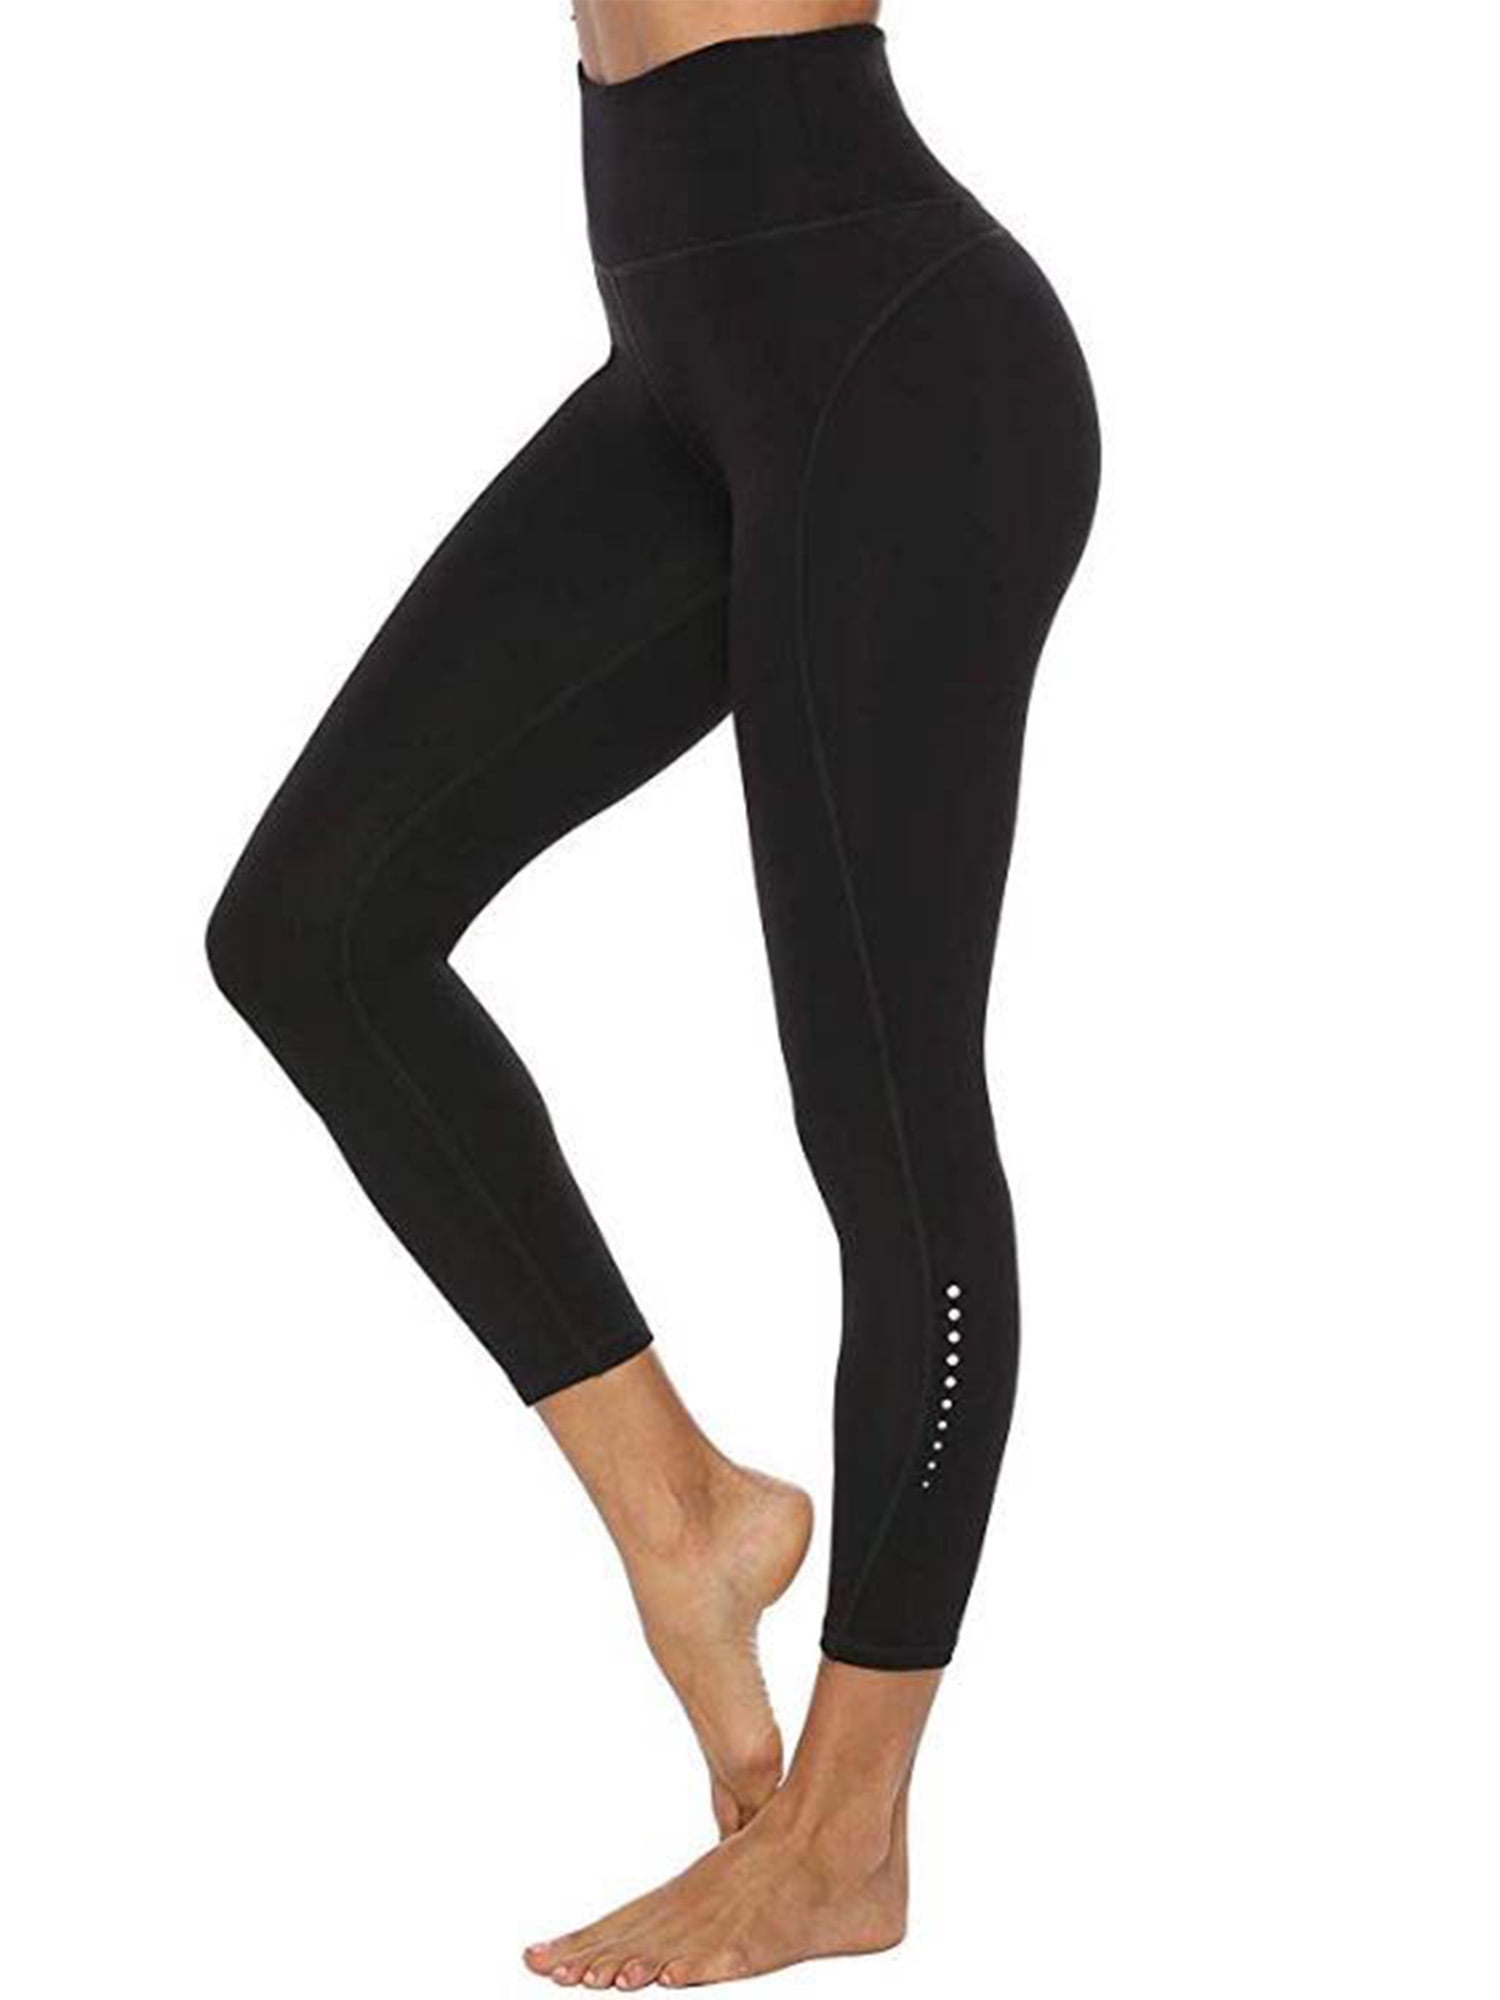 icyzone Womens Workout Ankle Legging Non See-Through Fabric Yoga Pants